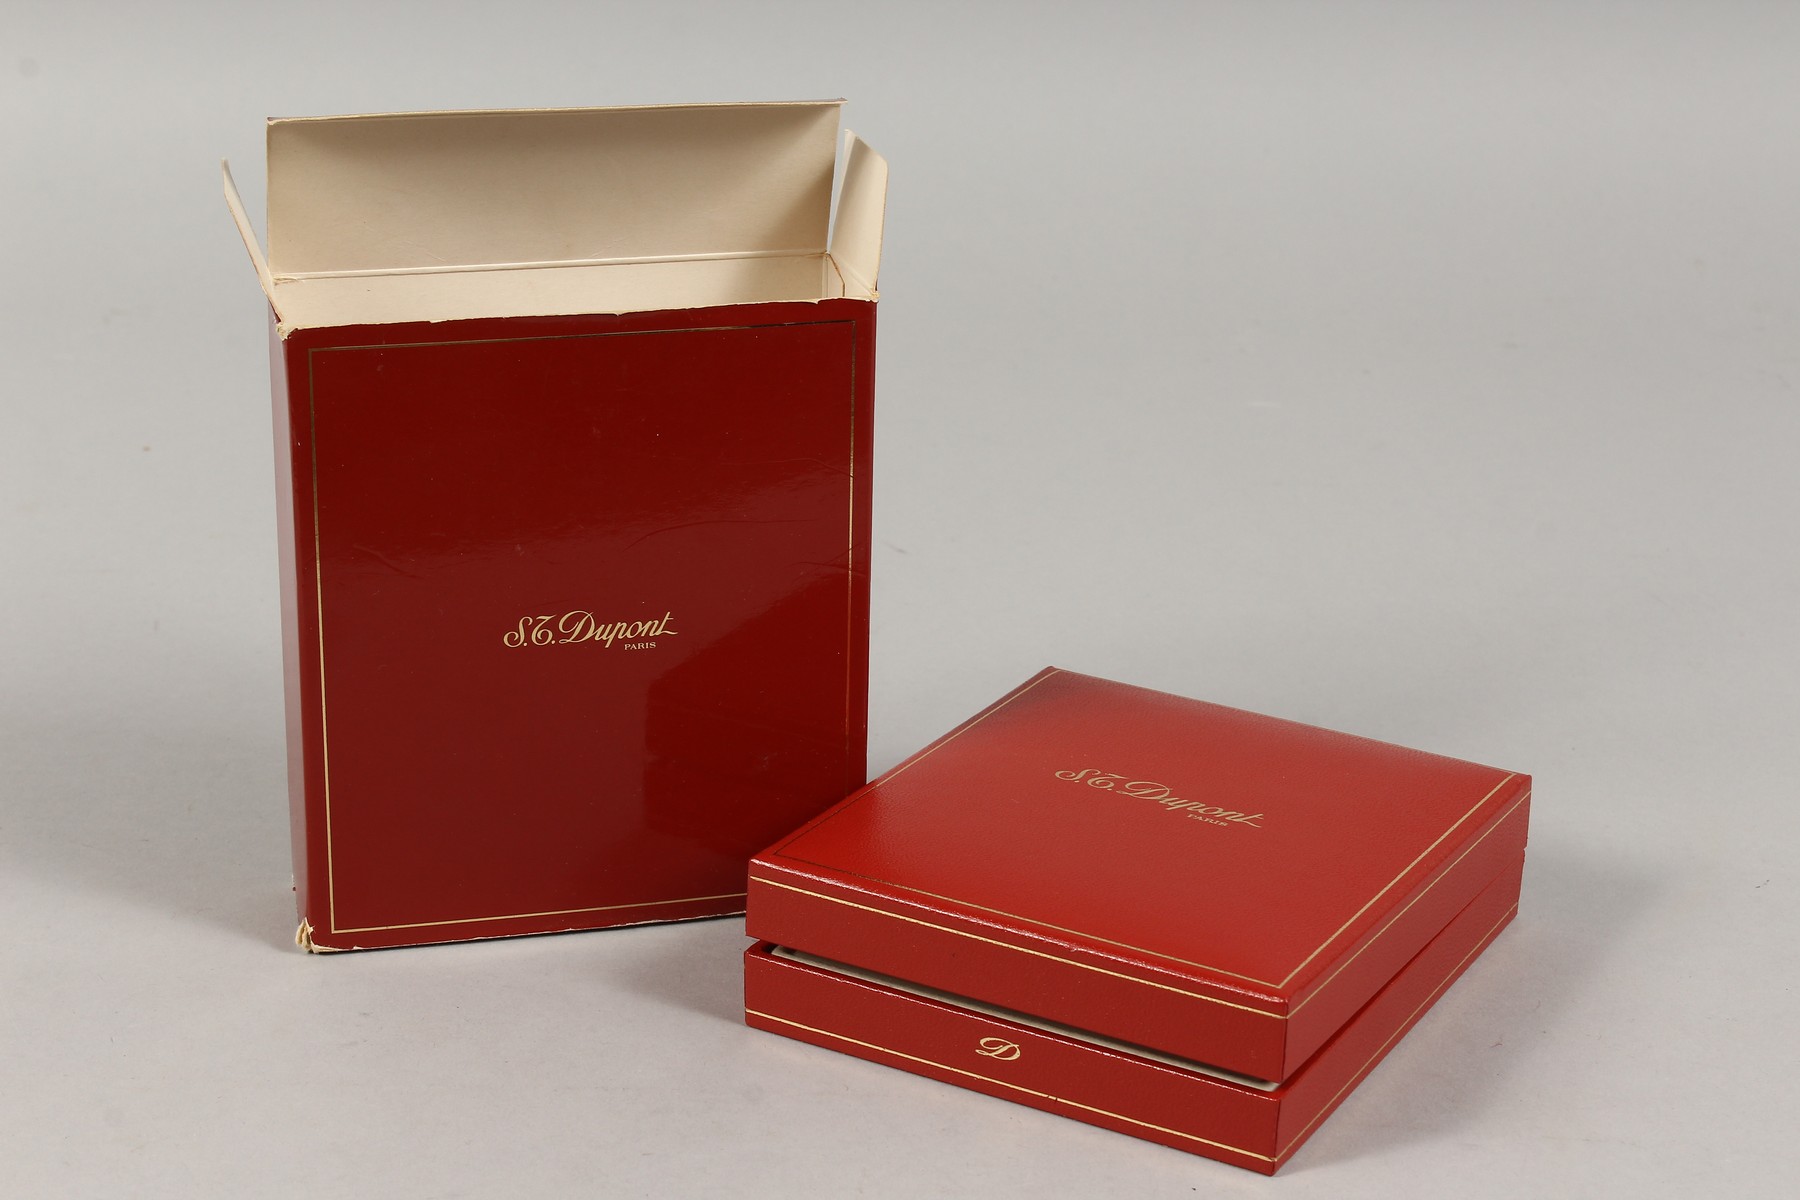 S. T. DUPONT Ligne pocket lighter, in original box with papers. - Image 7 of 8